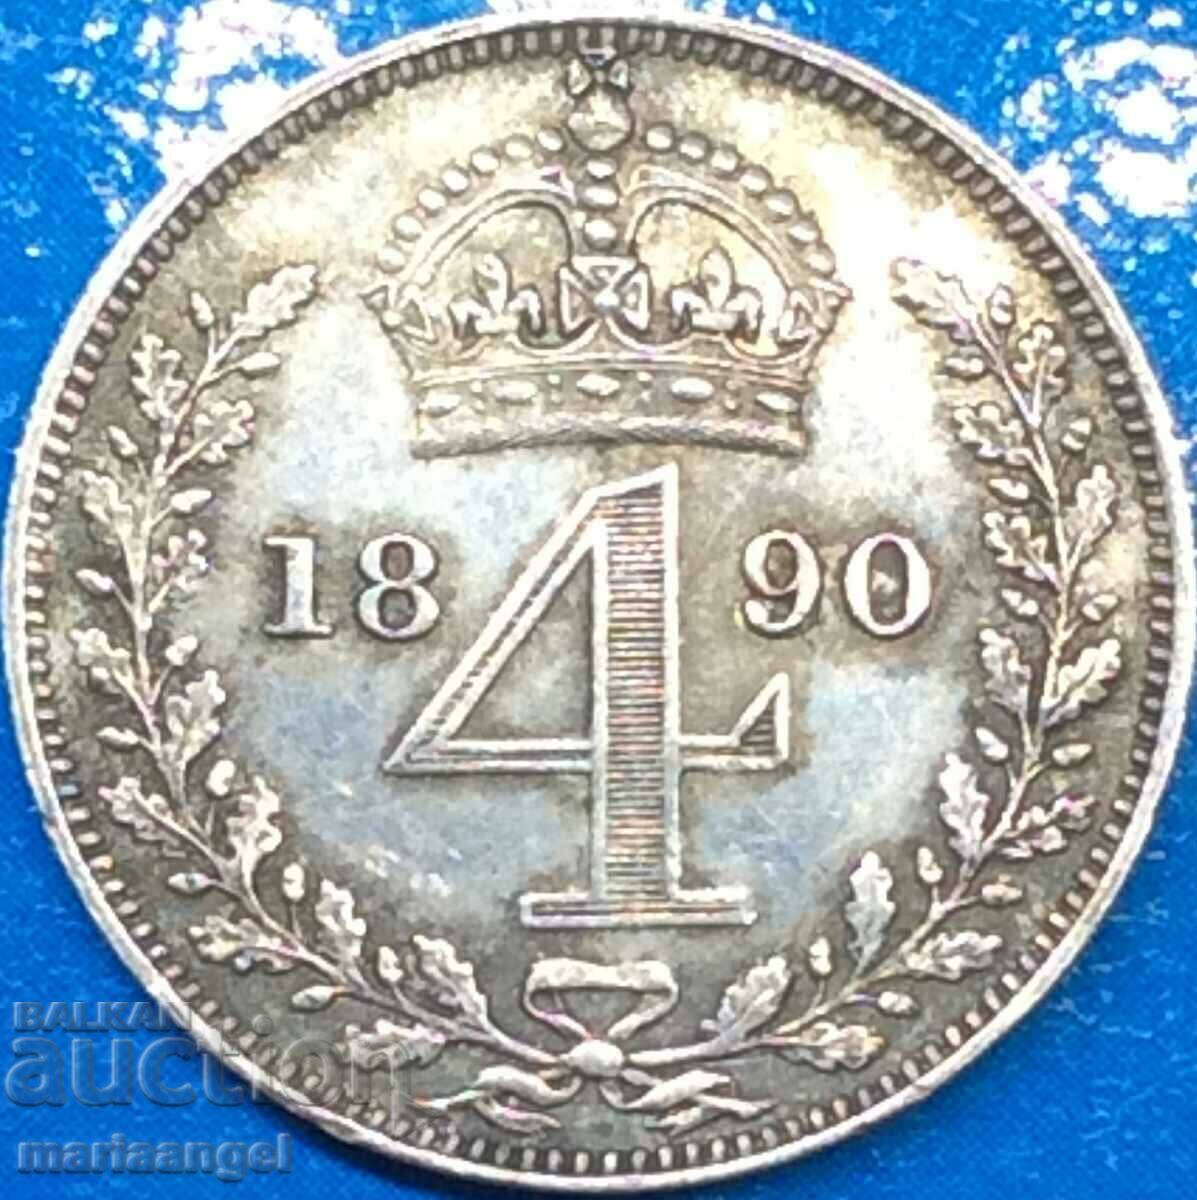 Maundy Great Britain 4 pence 1890 Victoria (crown) rare